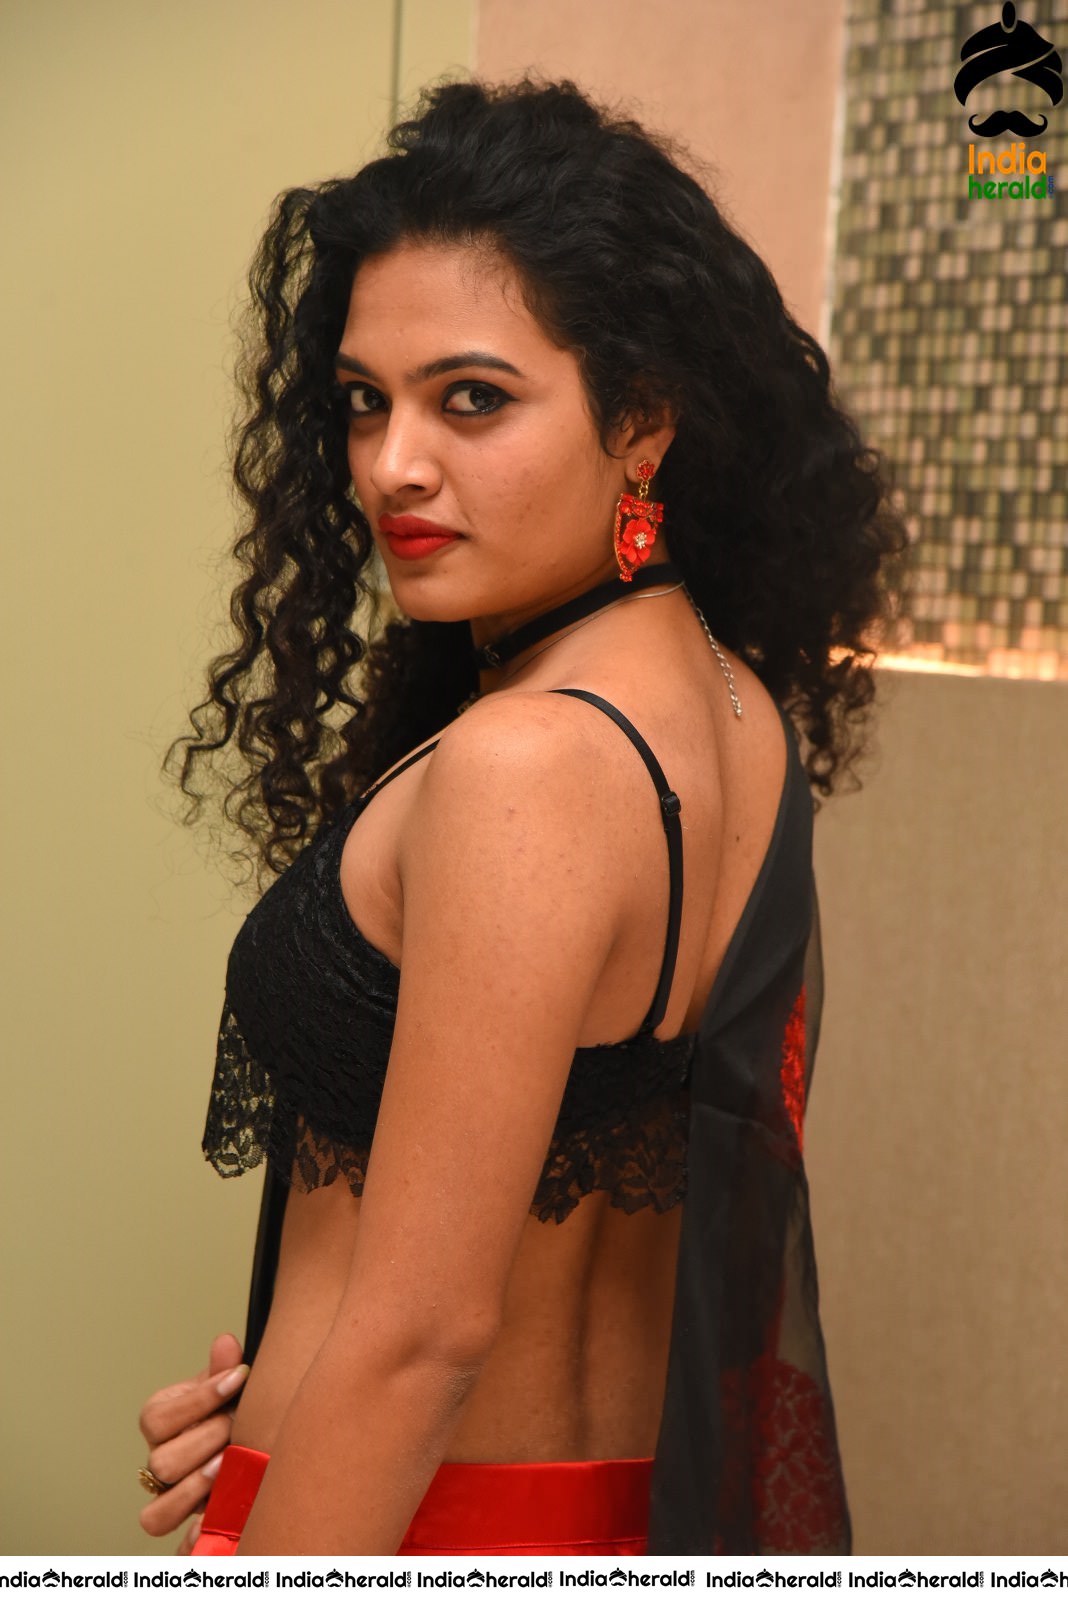 Riya Sizzling Hot Waist and Navel Show in Black Brassiere and Red Skirt Set 2